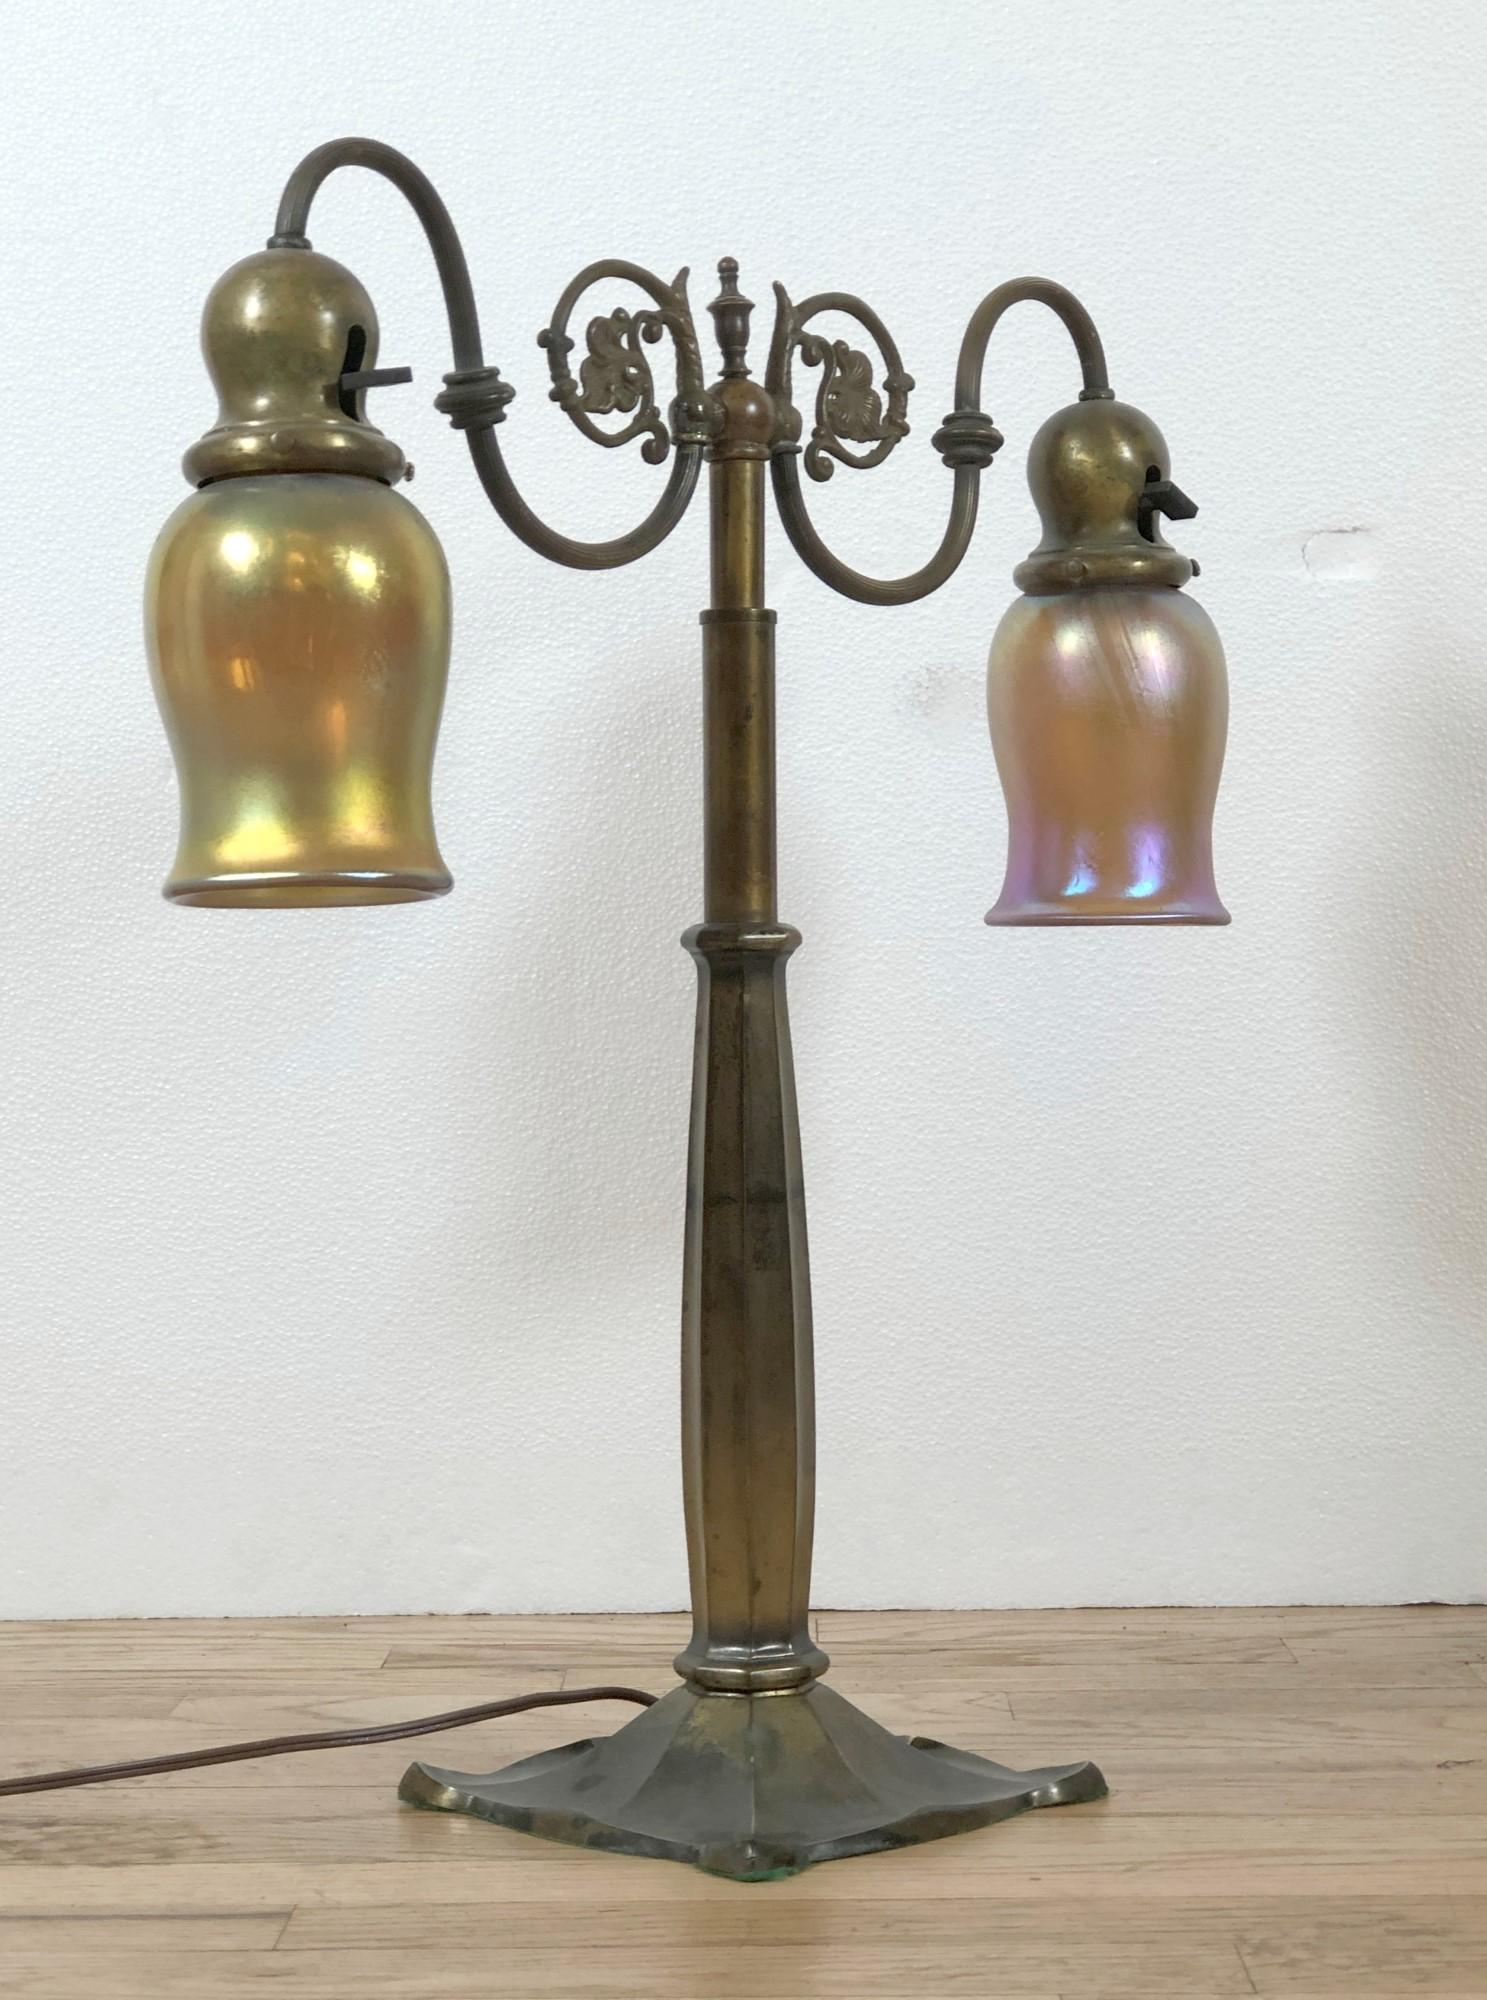 20th Century Bradley & Hubbard Table Lamp W/ 2-Arms and Iridescent Art Glass Shades